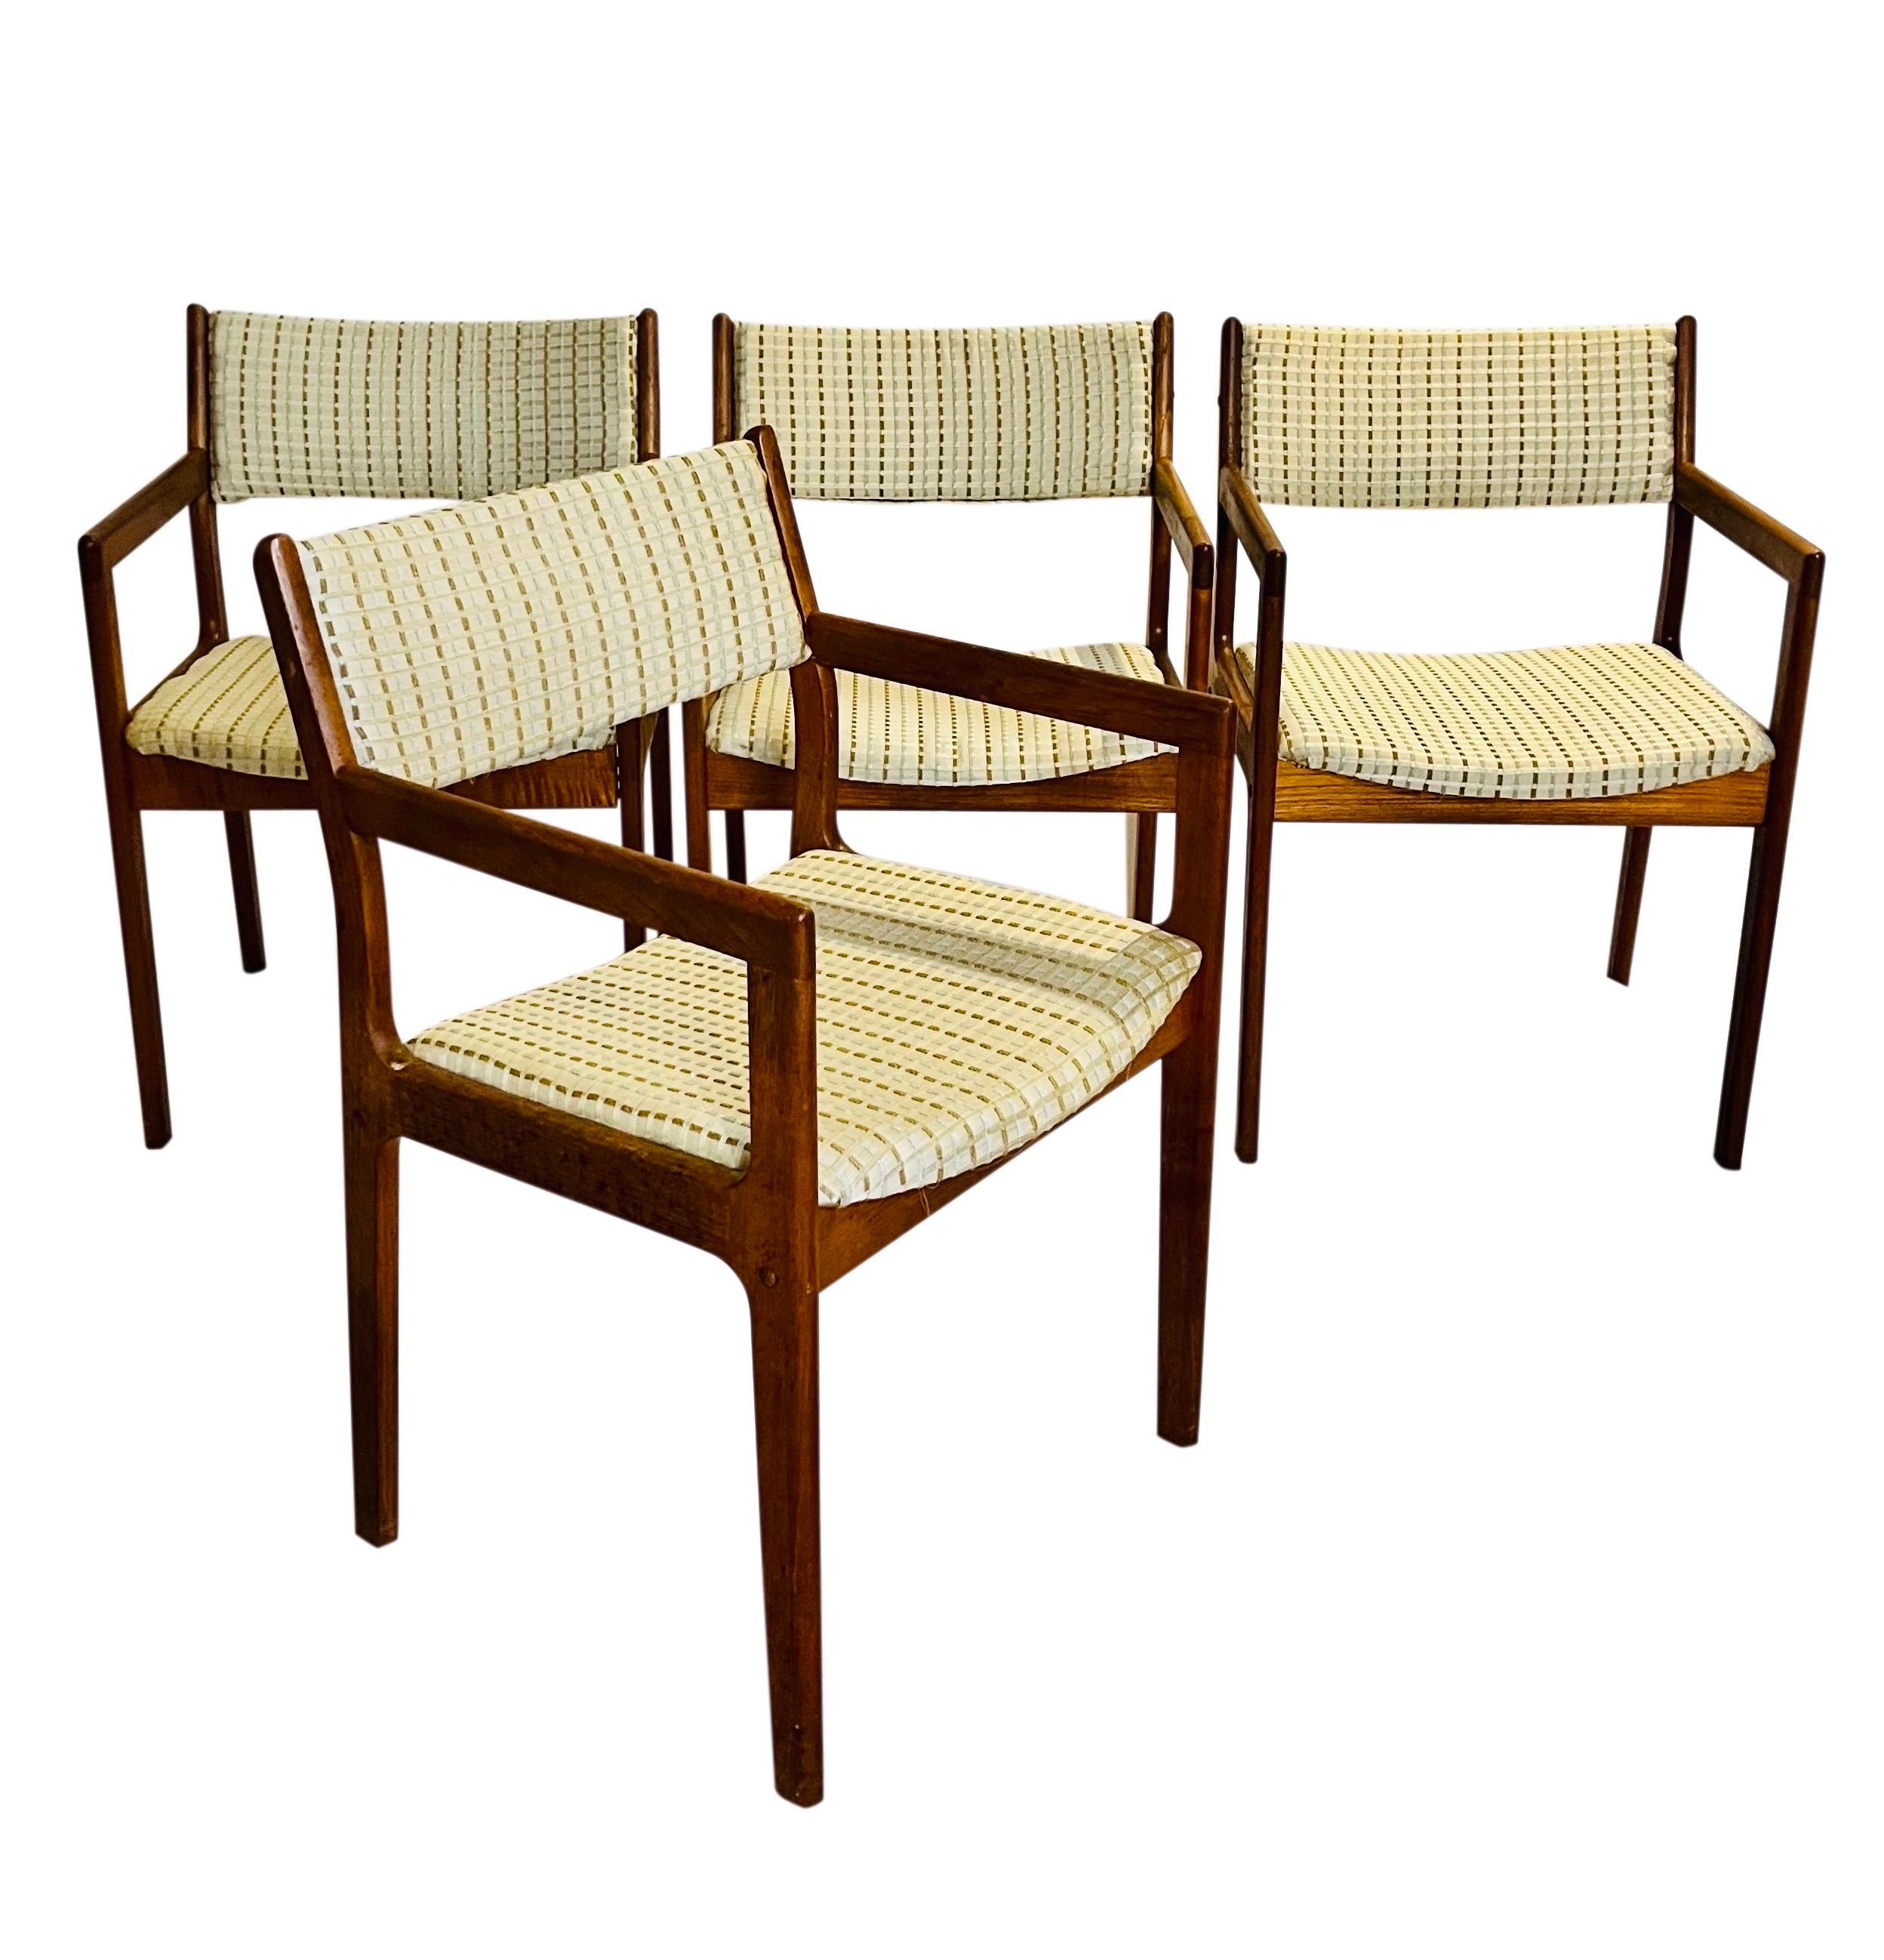 Midcentury Danish Teak Dining Chairs, Set of Four For Sale